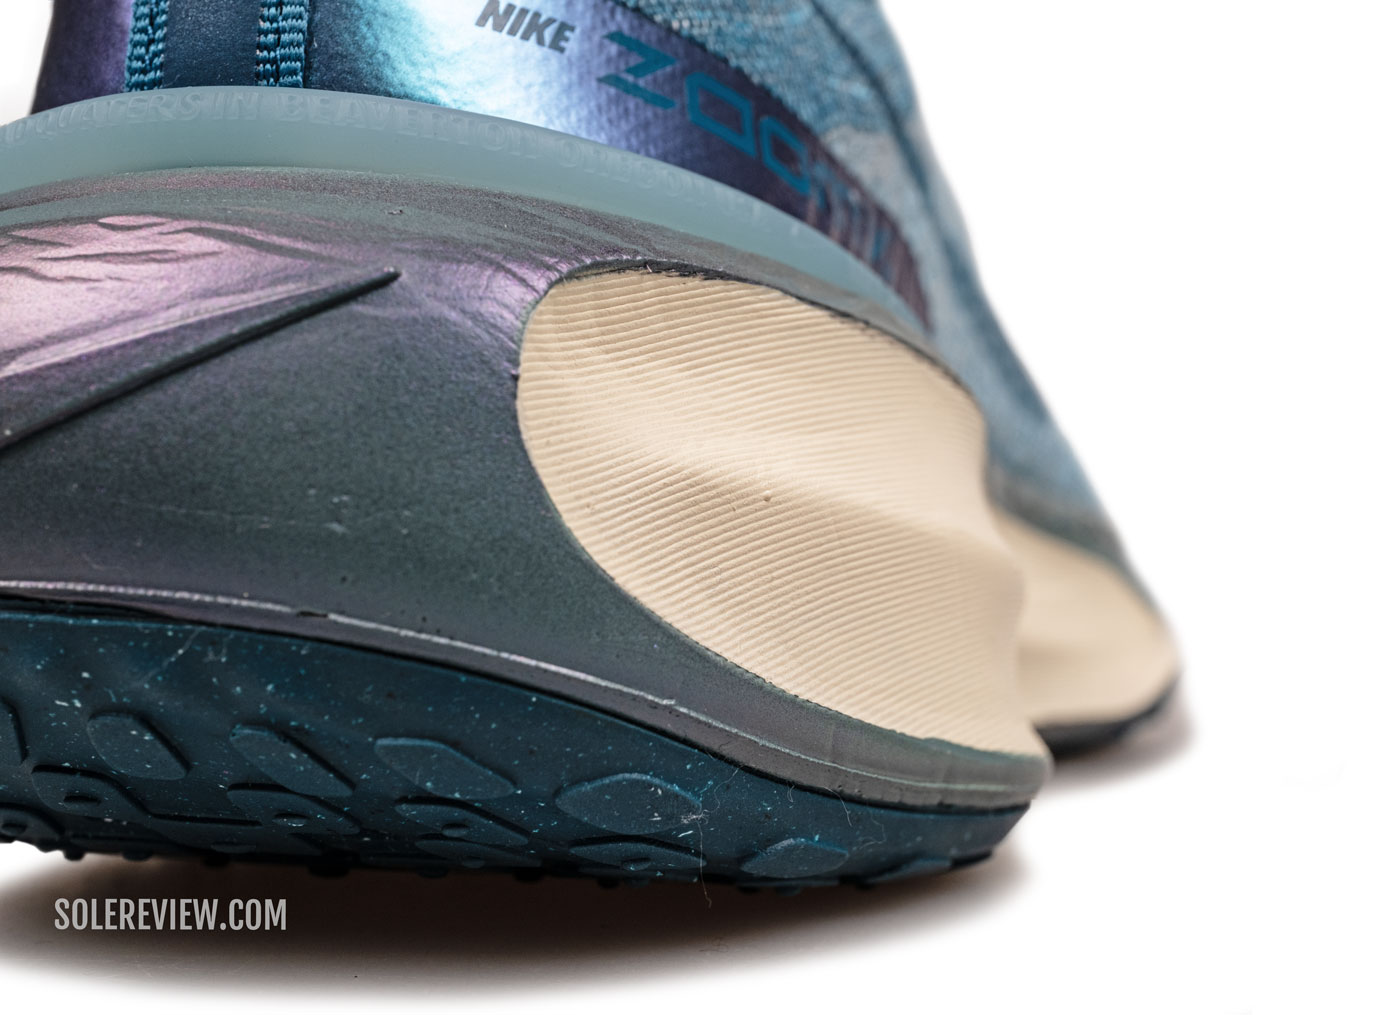 The grooved sidewall of the Nike Invincible Run 3.